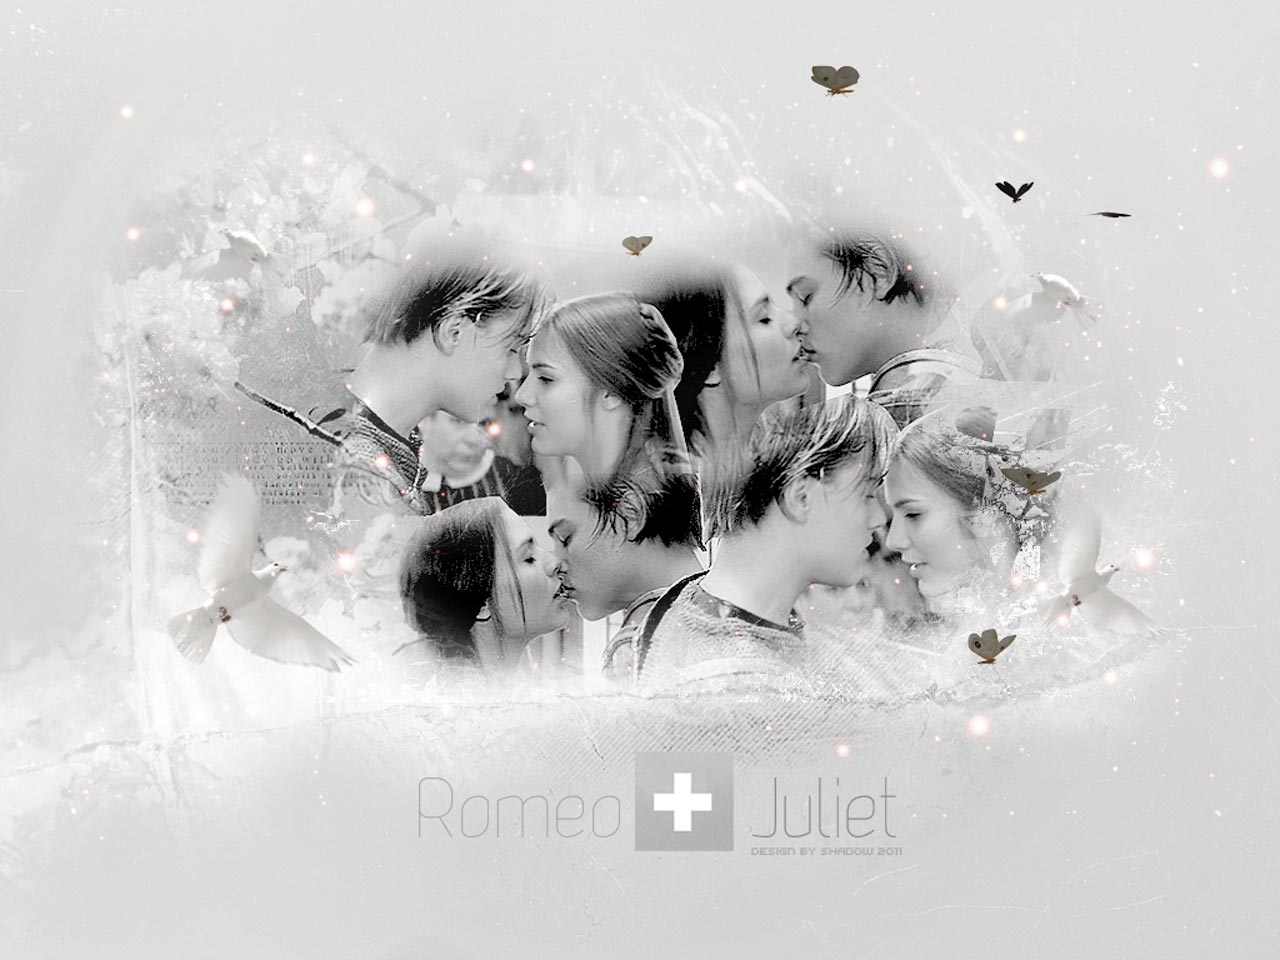 romeo and juliet background powerpoint